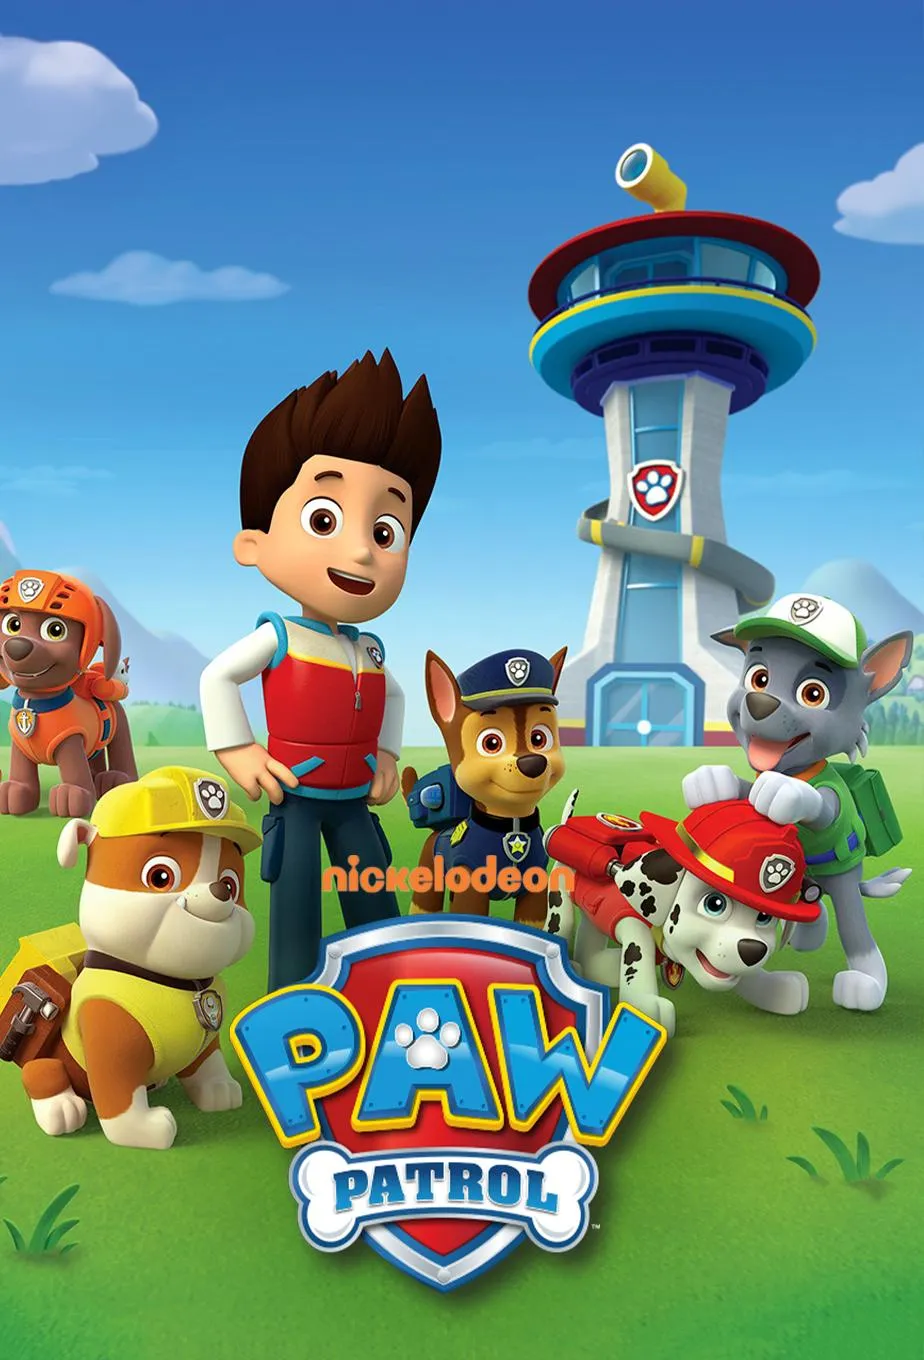 Watch Paw Patrol Online on Showmax. Available to stream now.